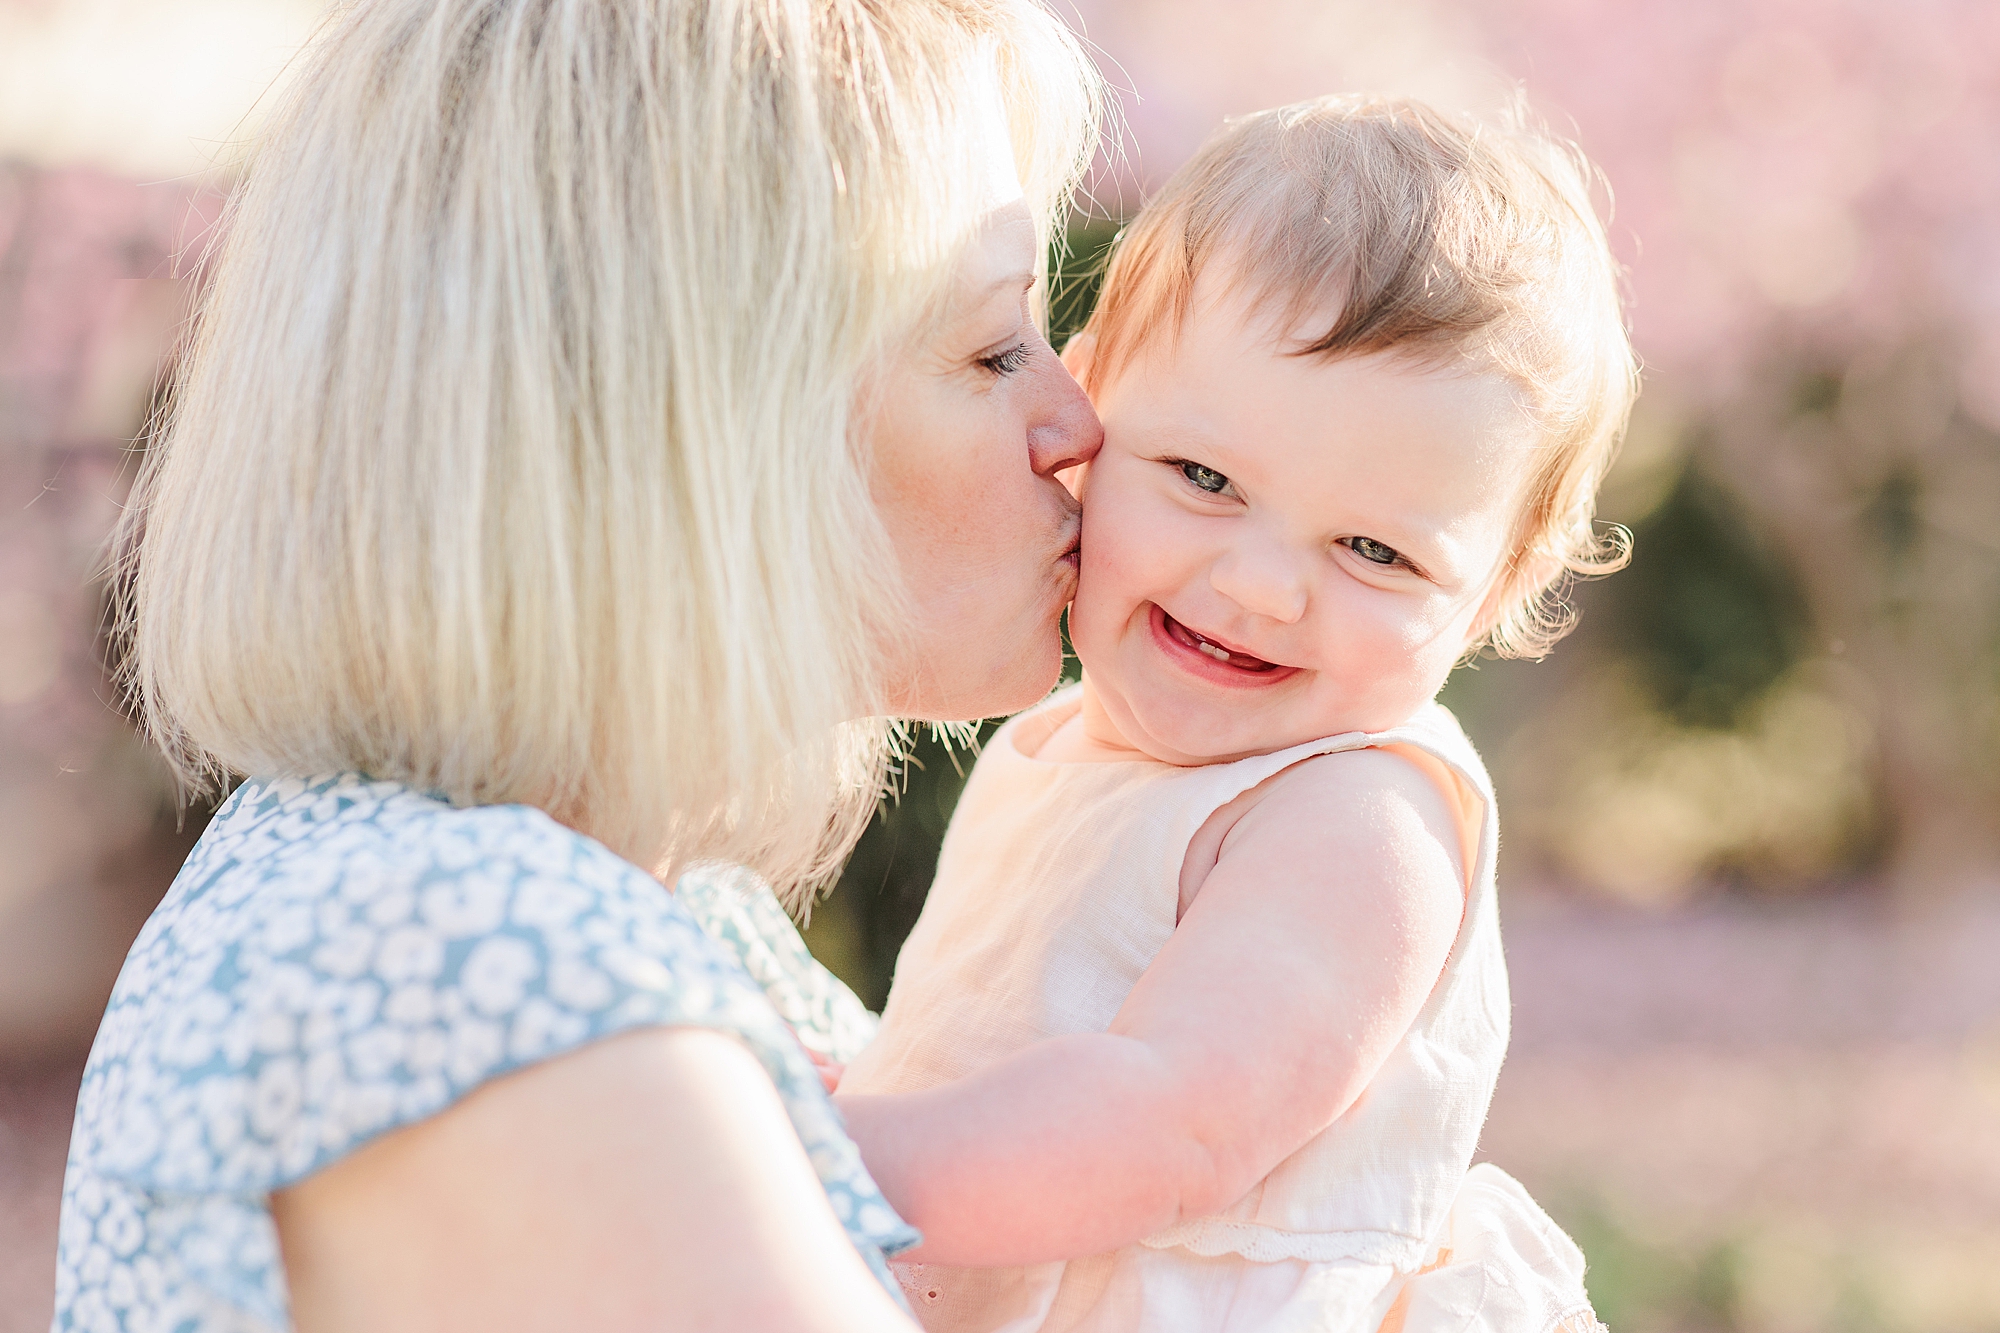 mom kisses baby girl on cheek during family photos by cherry blossoms